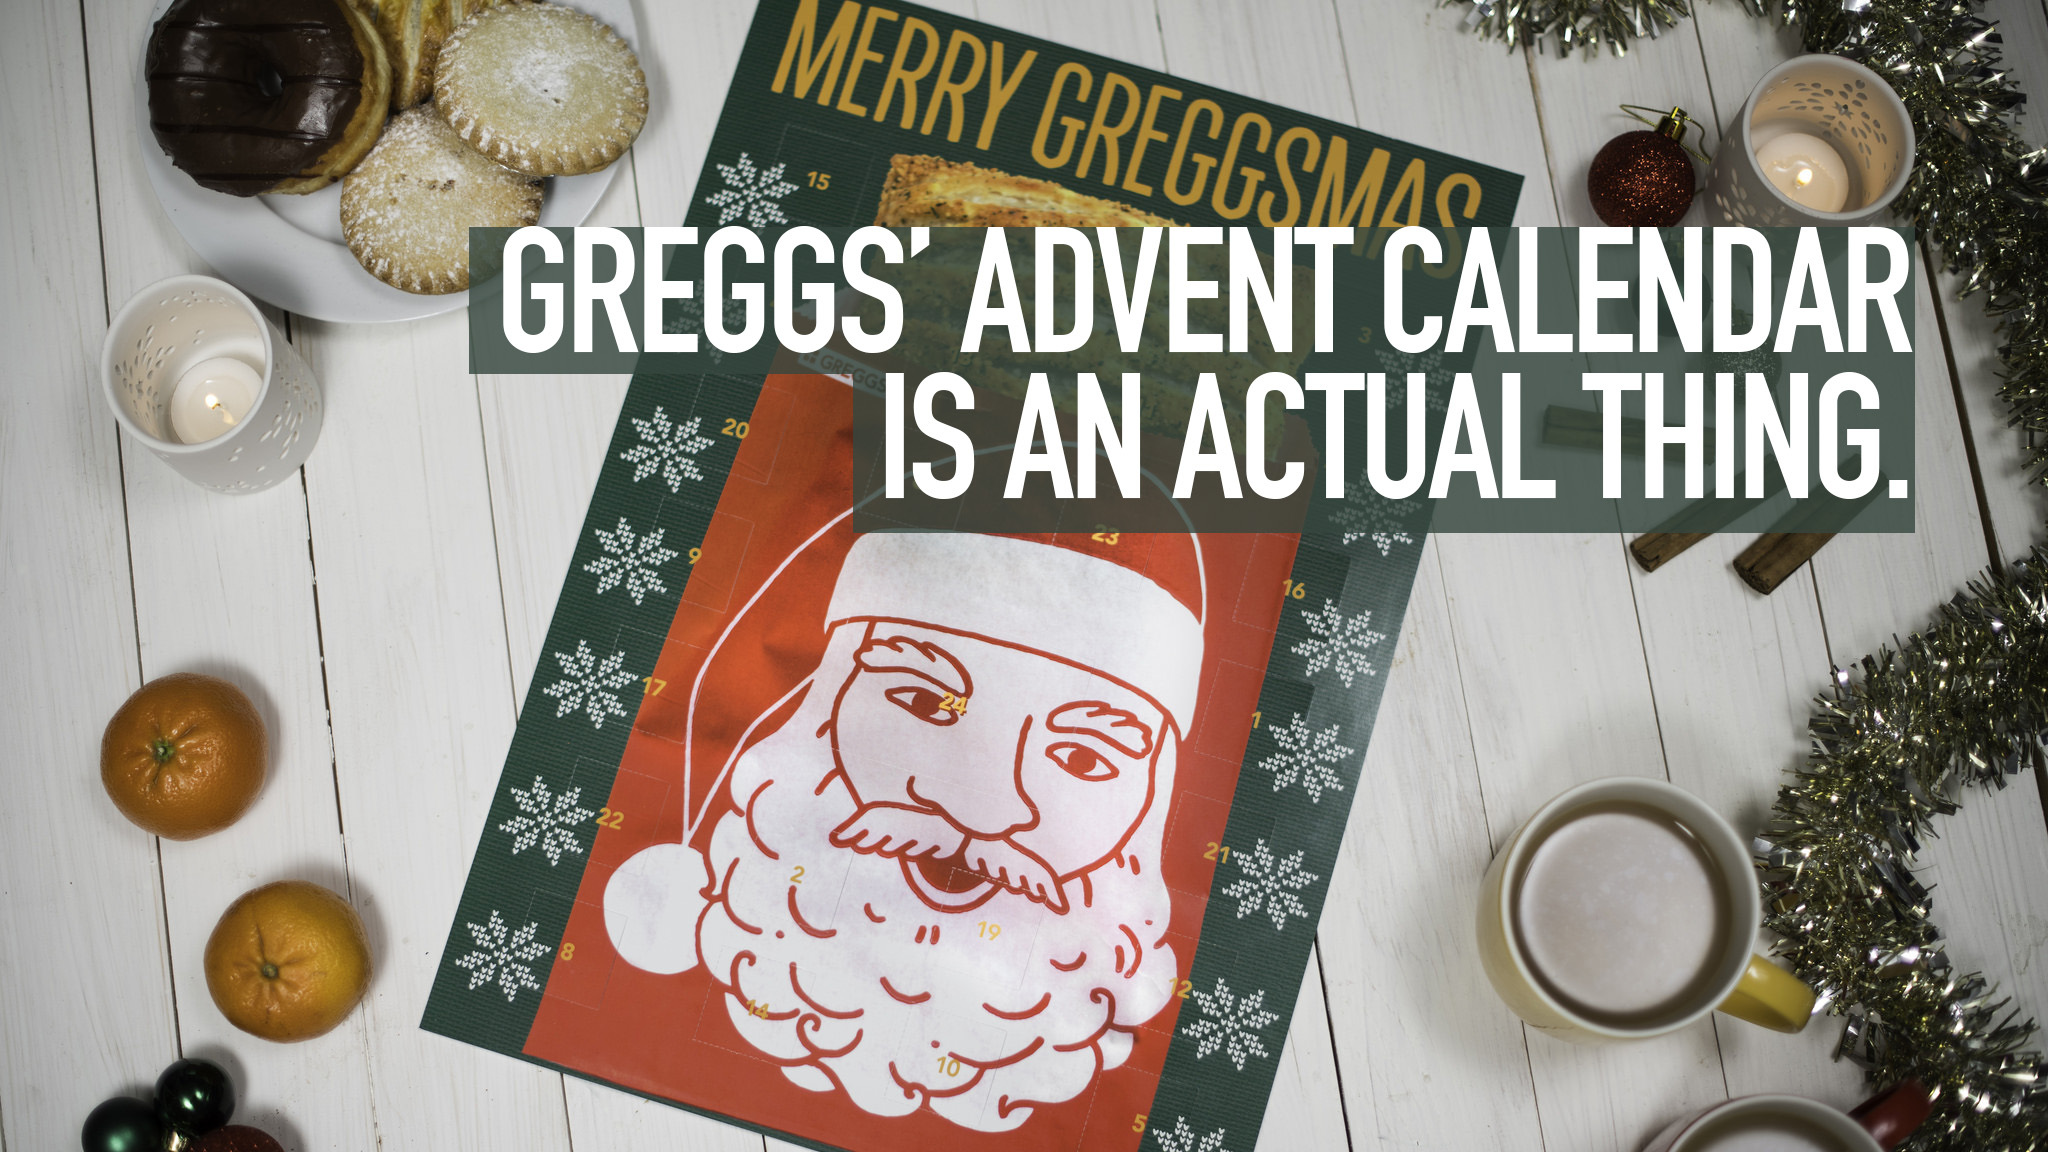 The Greggs advent calendar is an actual, real thing, and you can buy one.